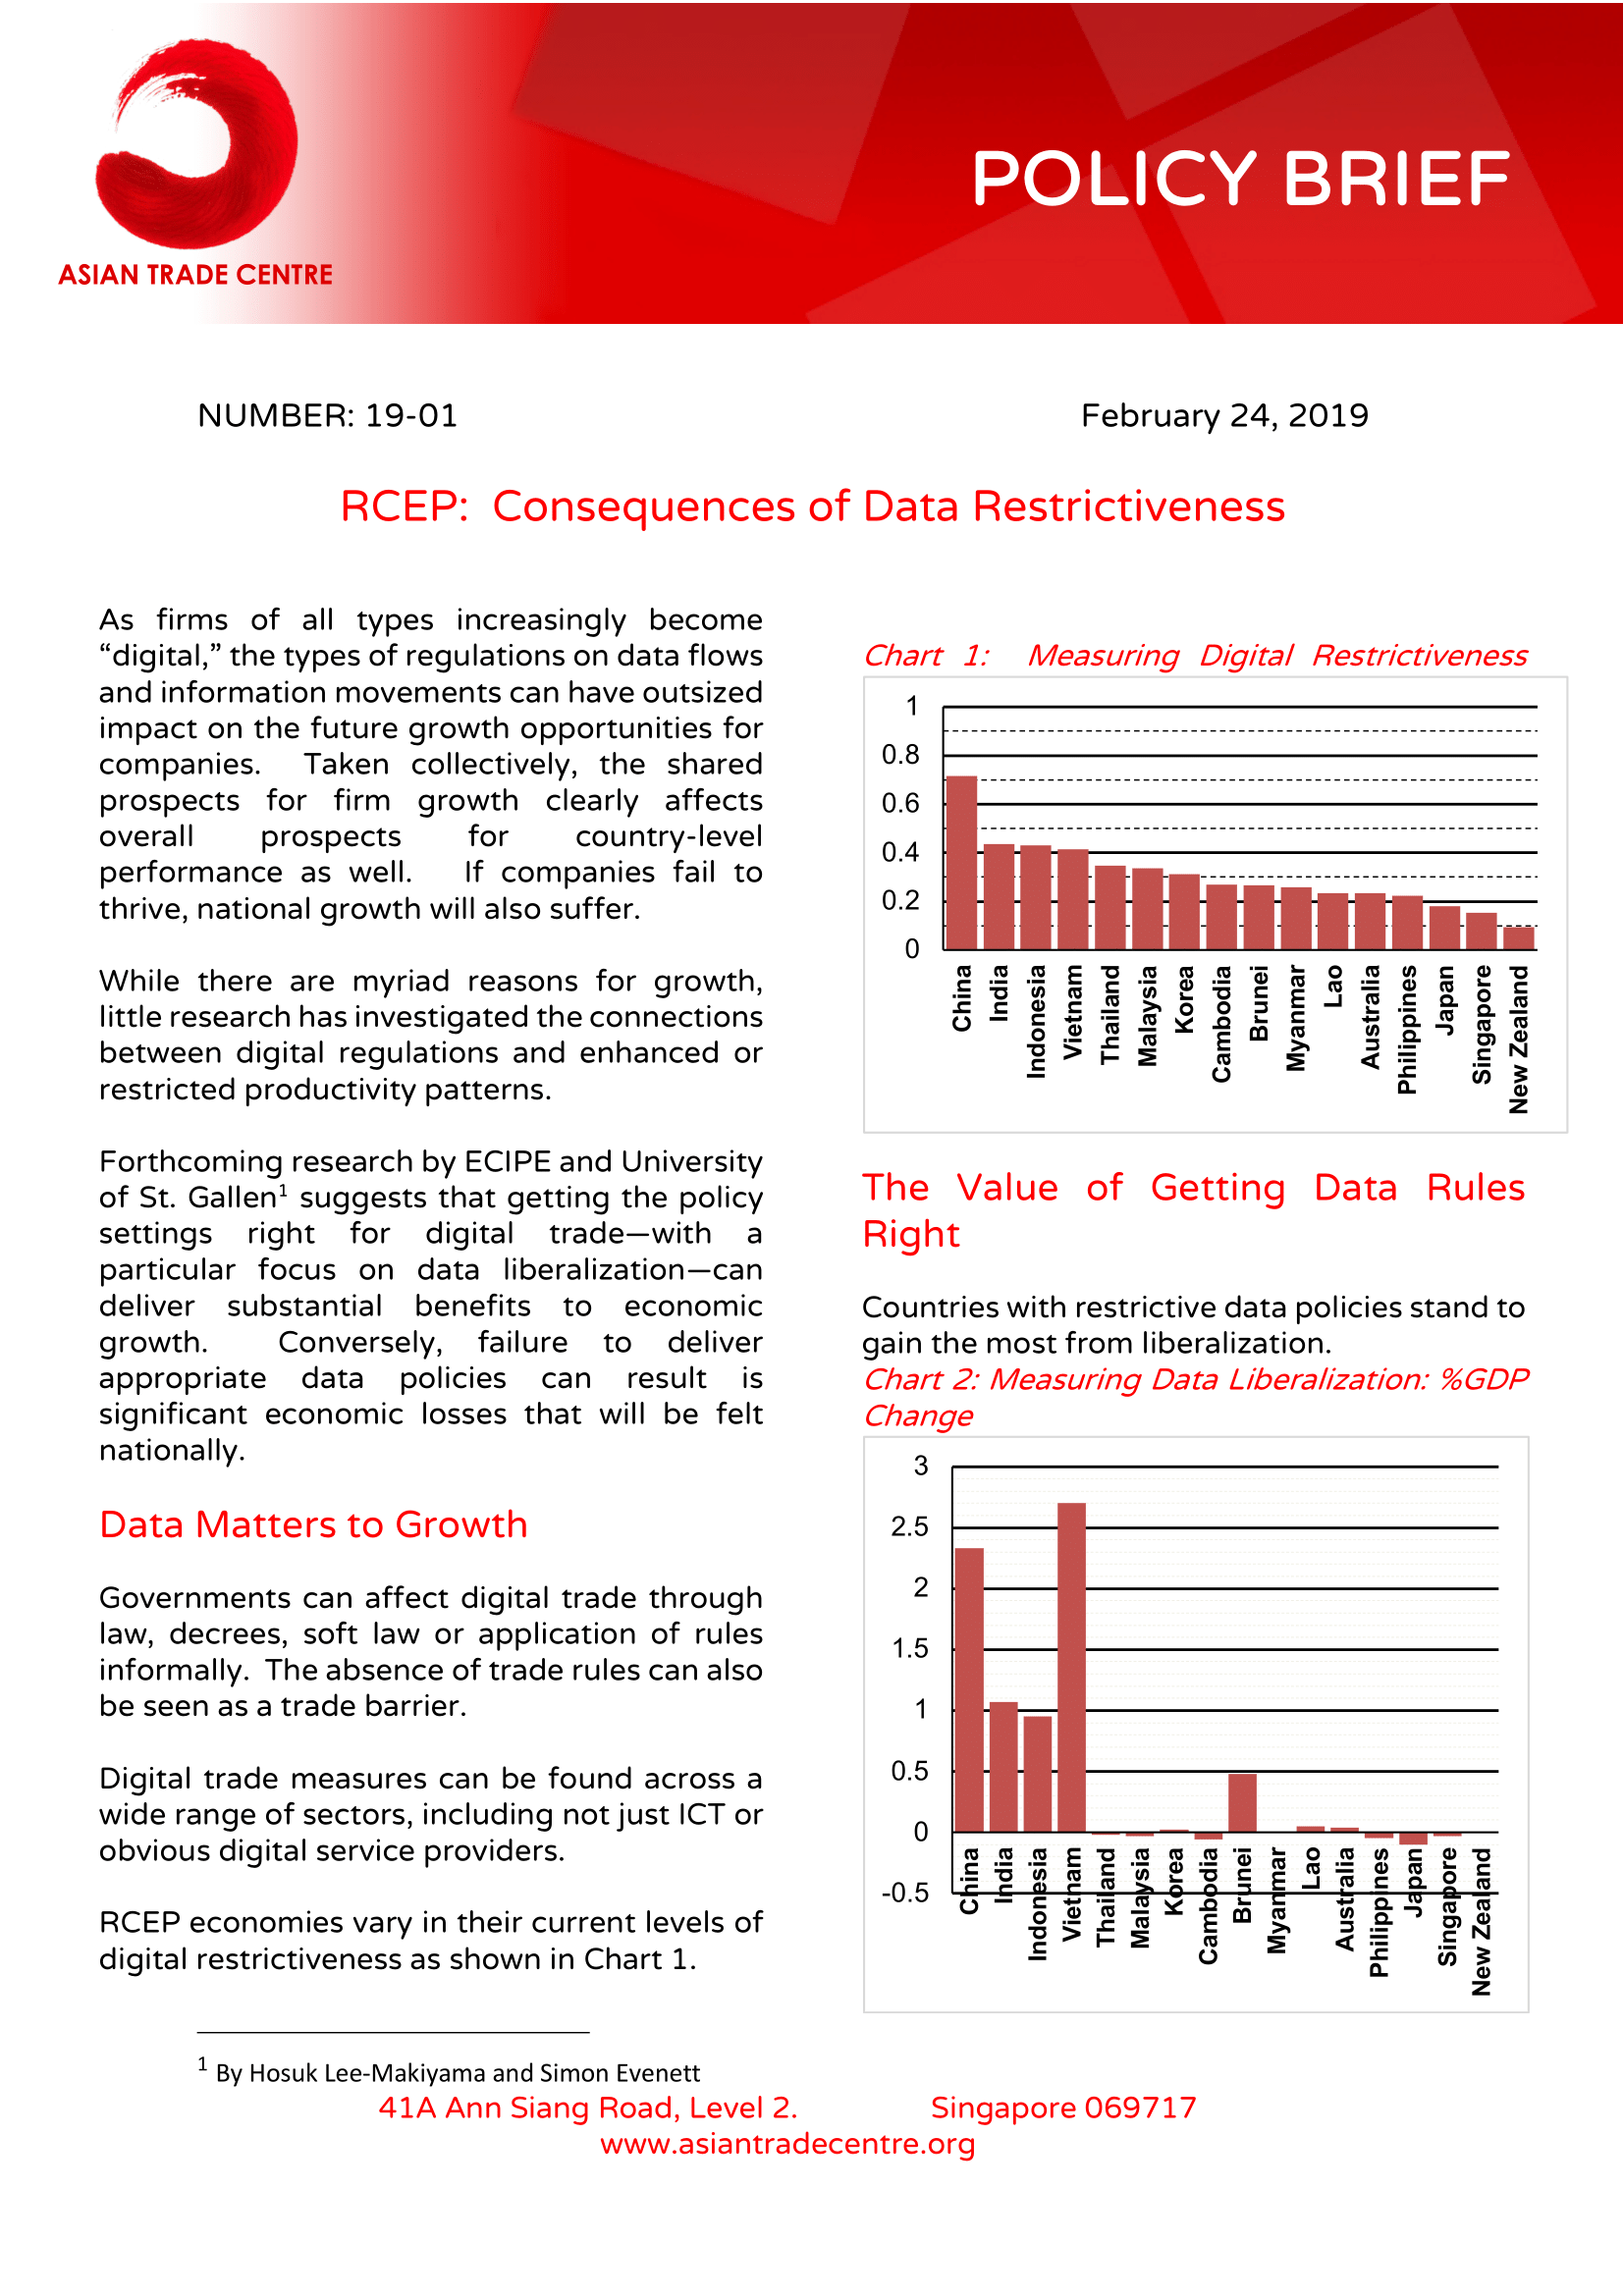 Policy+Brief+19-01+RCEP+Data+Liberalization-1.png